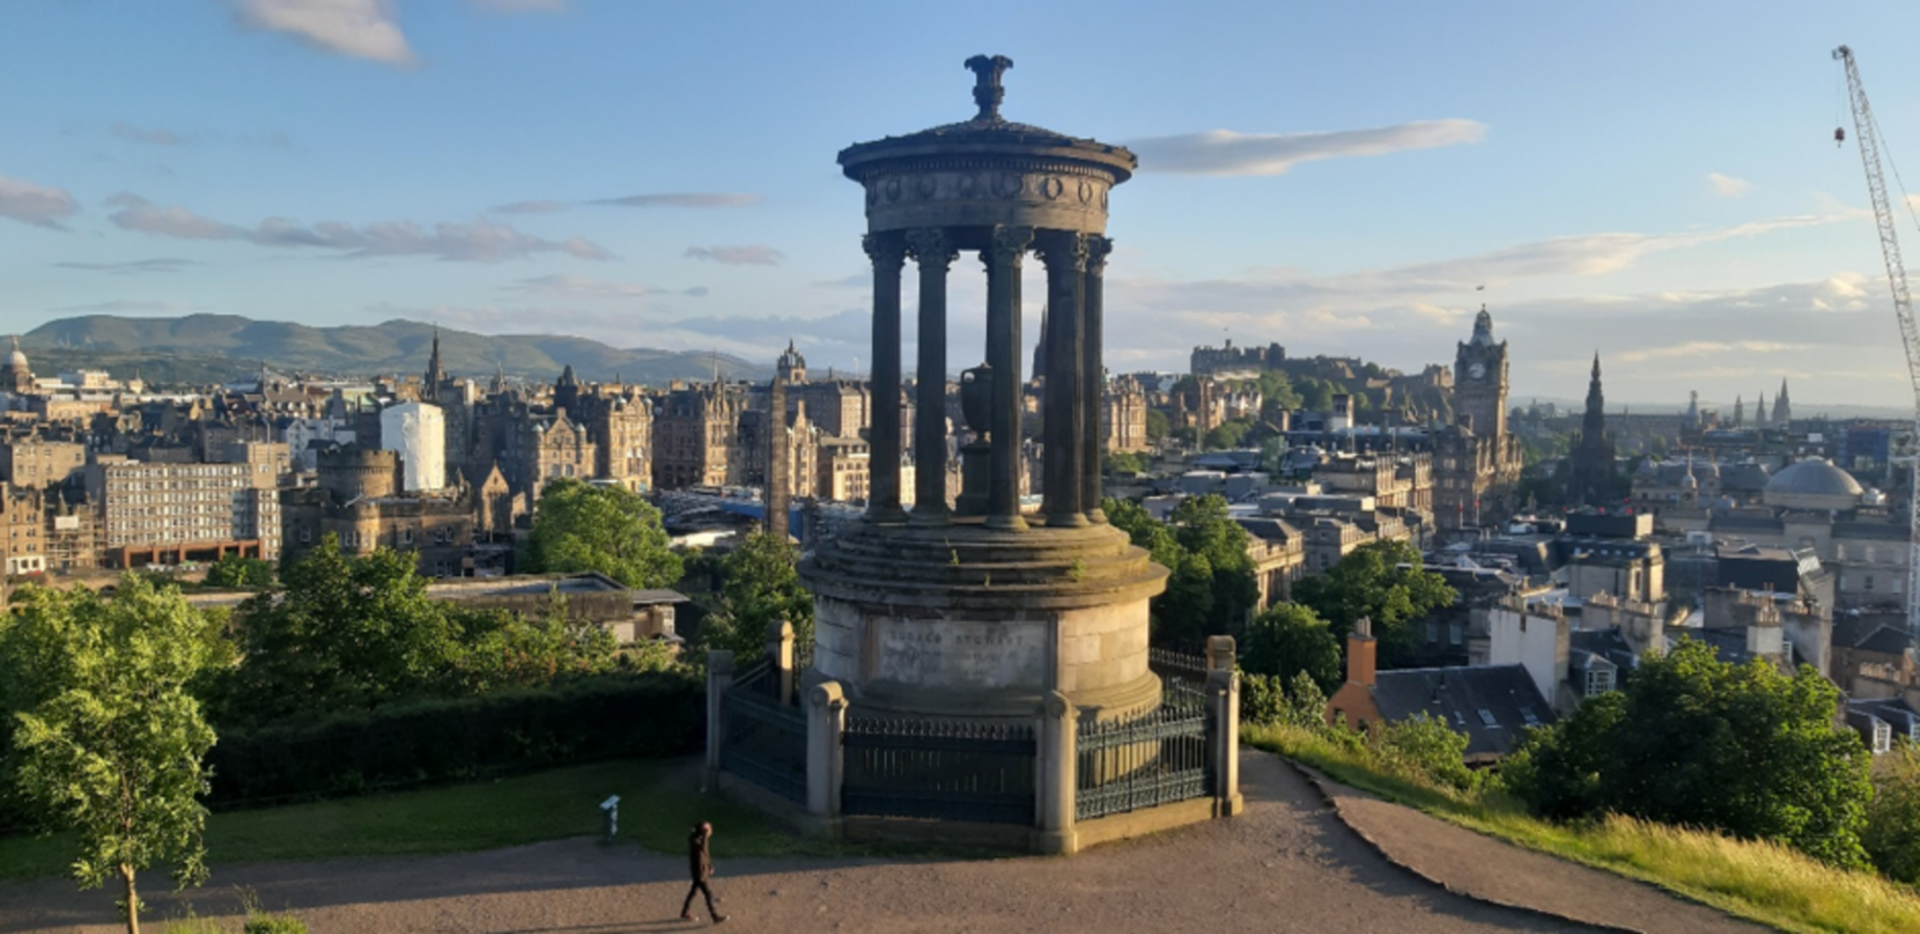 View from the top of Calton Hill